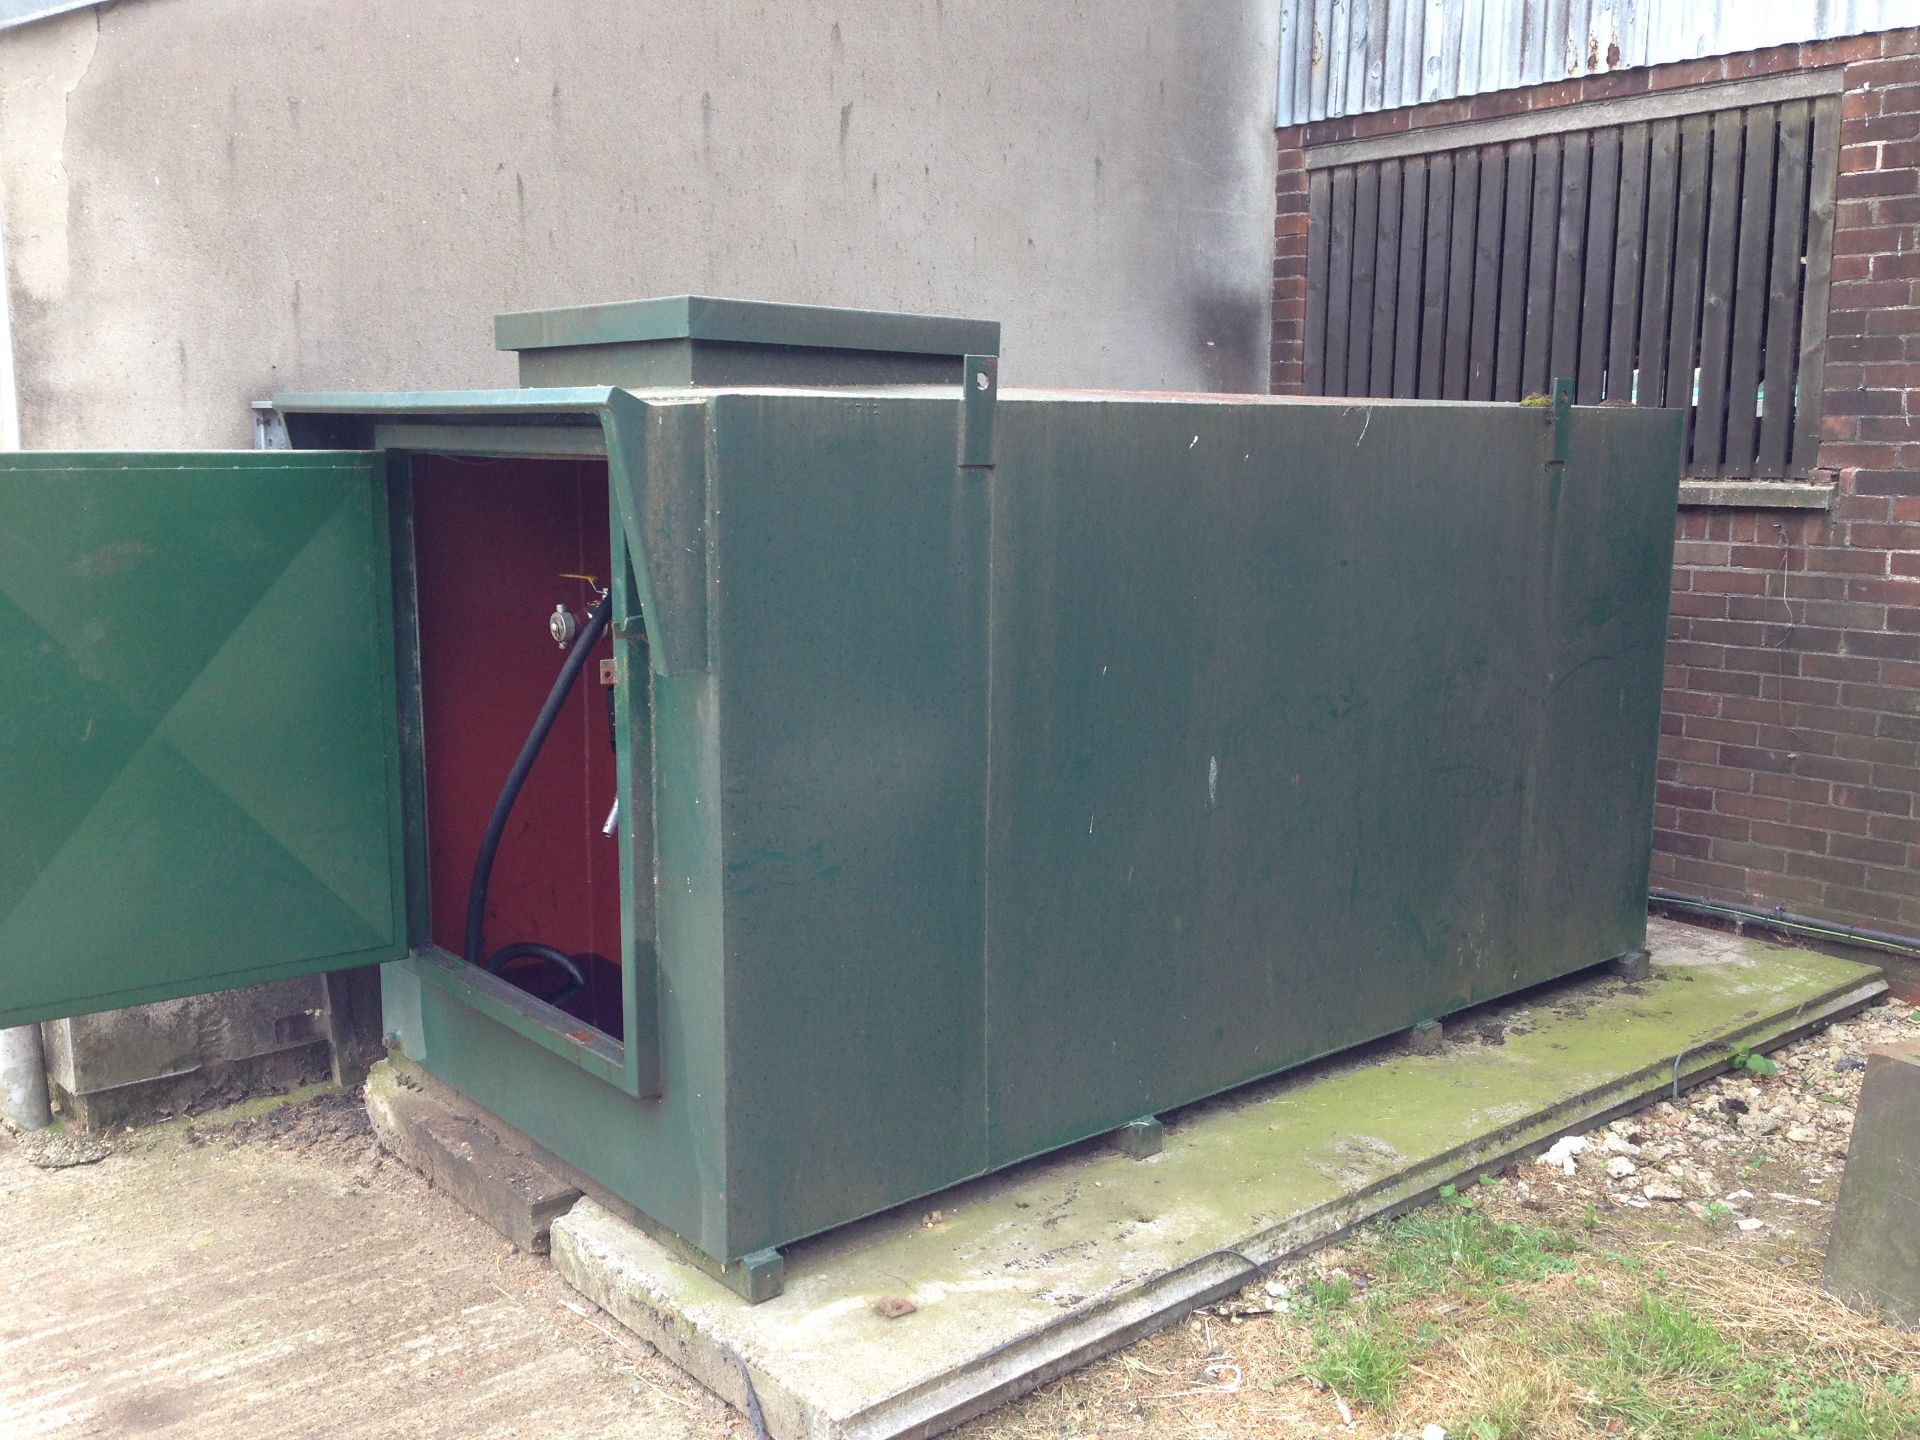 Wiles Fuel Store, 4,500 Litre Capacity. Buyer to remove and make good. Location Diss, Norfolk. - Image 2 of 2